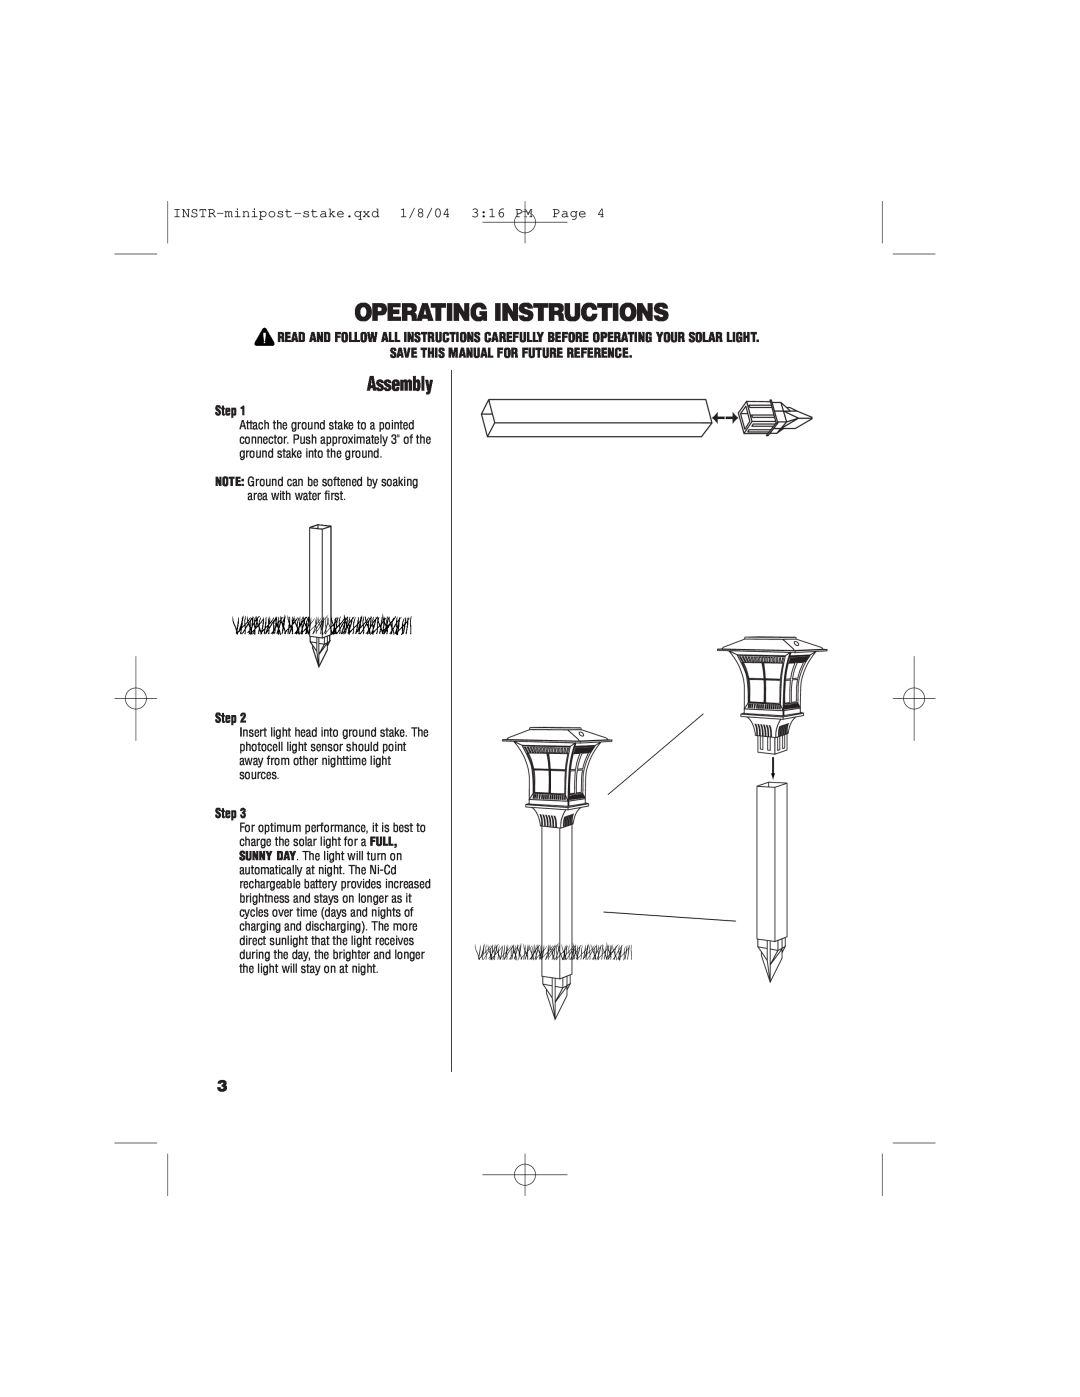 Brinkmann 822-2500-2 owner manual Operating Instructions, Assembly, Step, INSTR-minipost-stake.qxd1/8/04 3 16 PM Page 